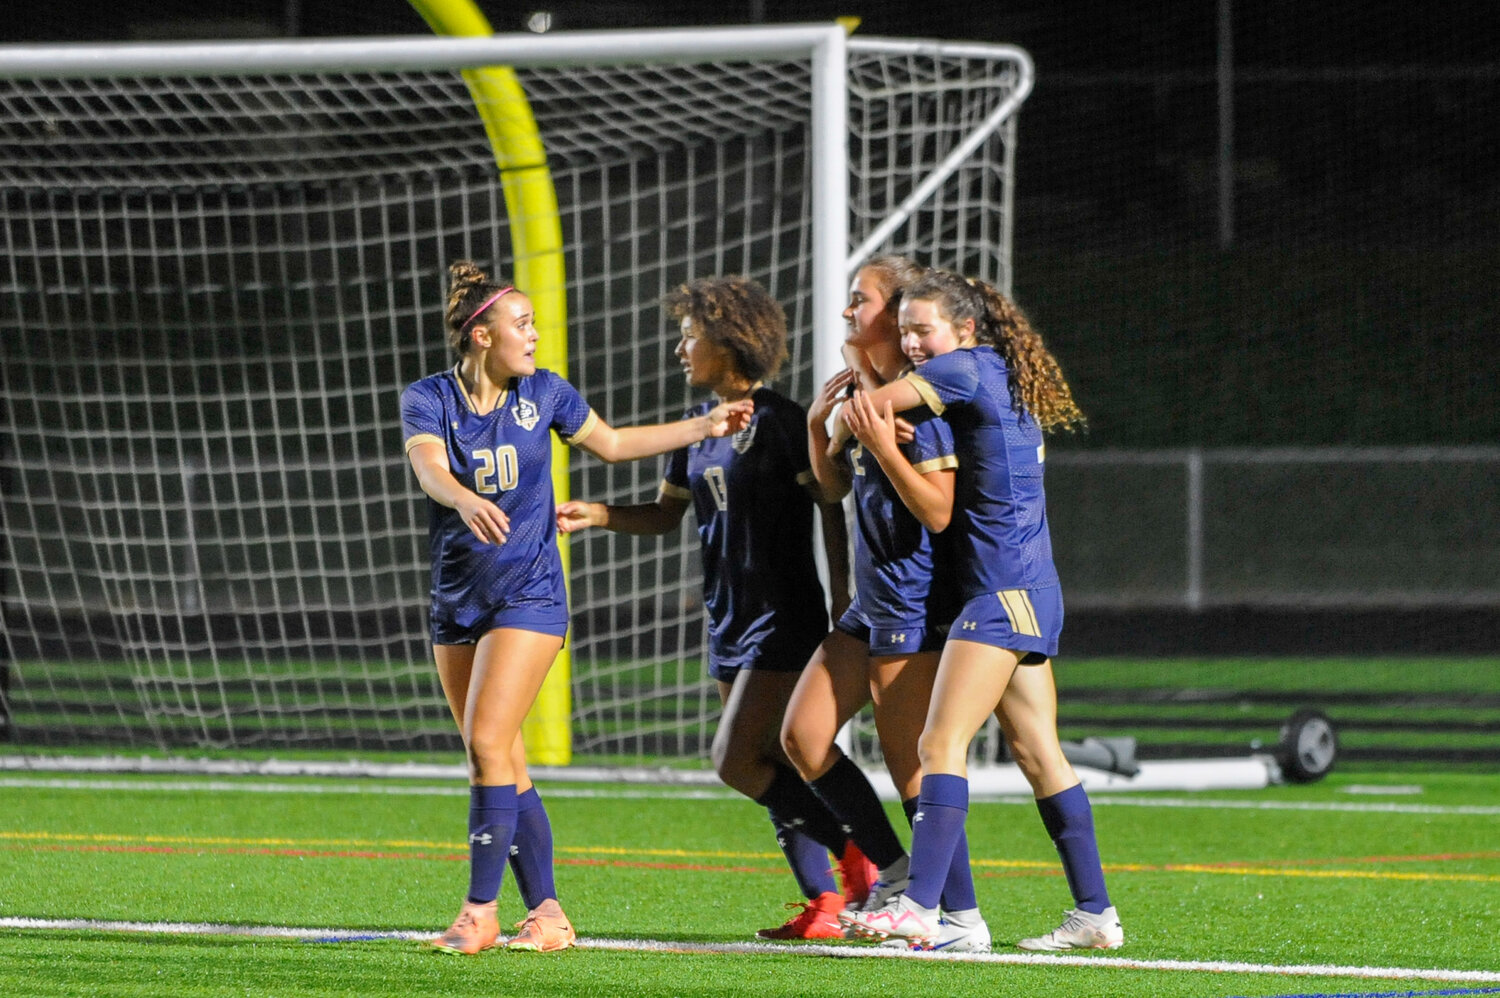 Severna Park celebrated the second goal of the match.